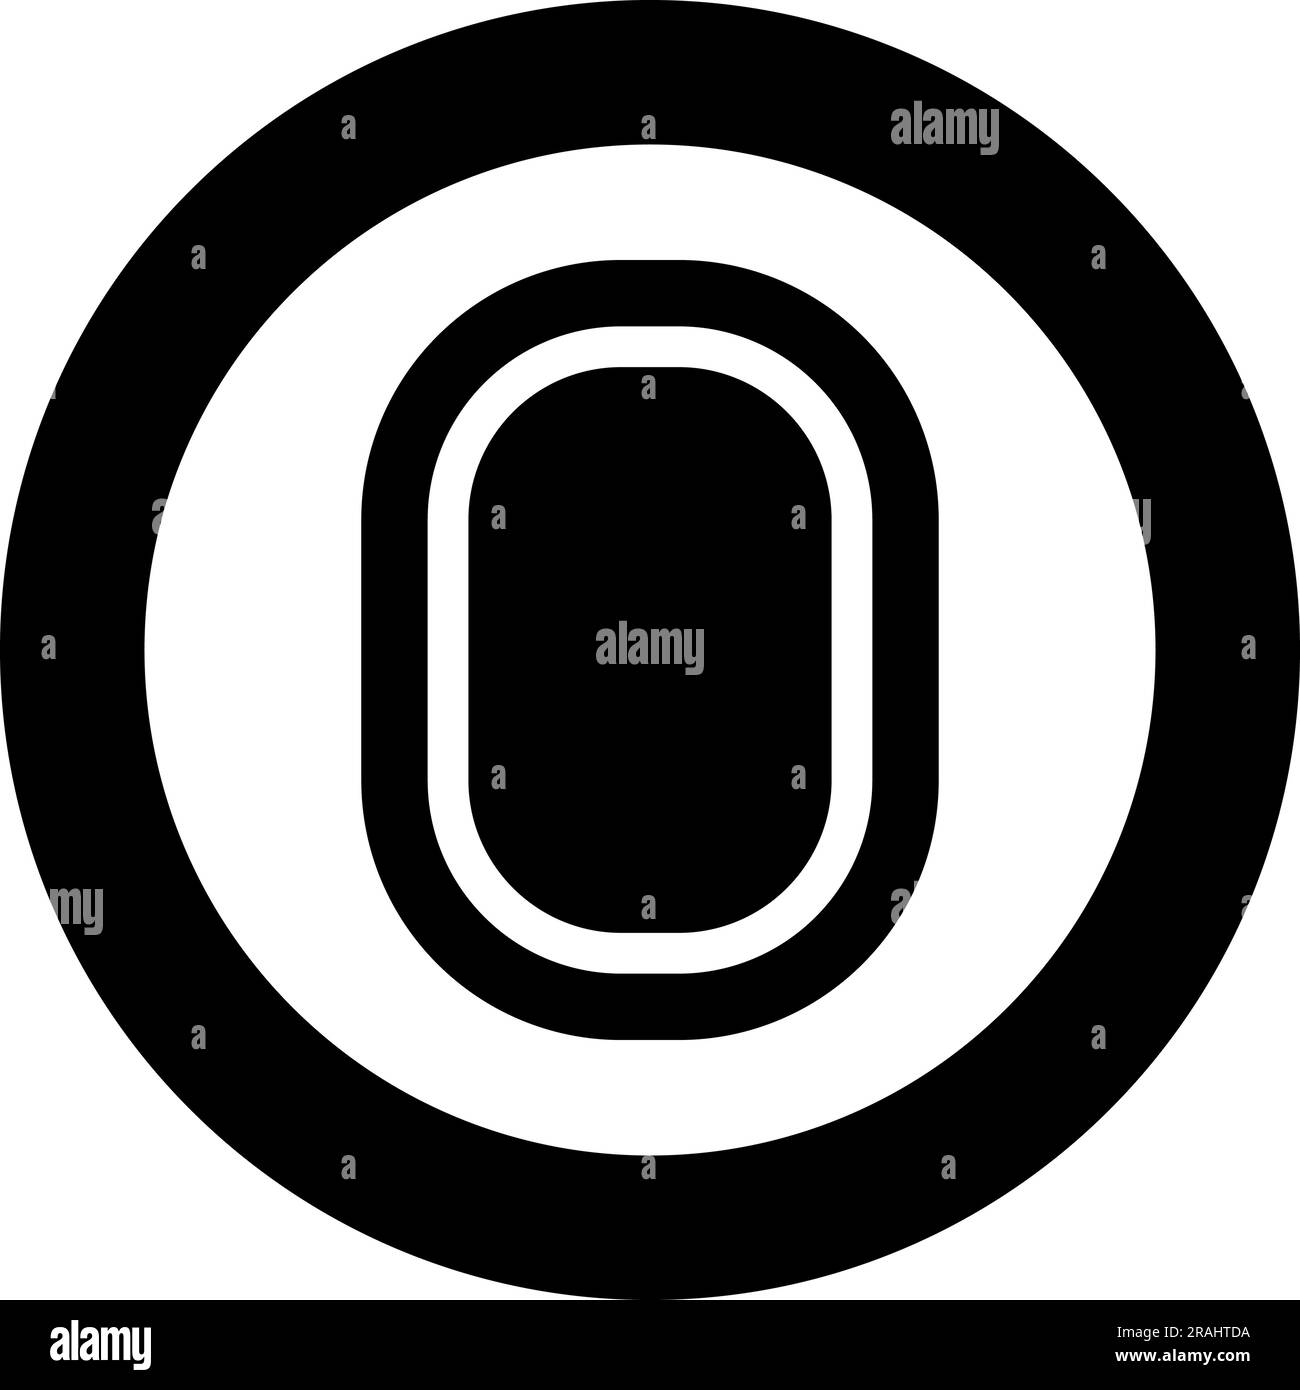 Illuminator of aircraft airplane window airliner porthole plane interior icon in circle round black color vector illustration image solid outline Stock Vector